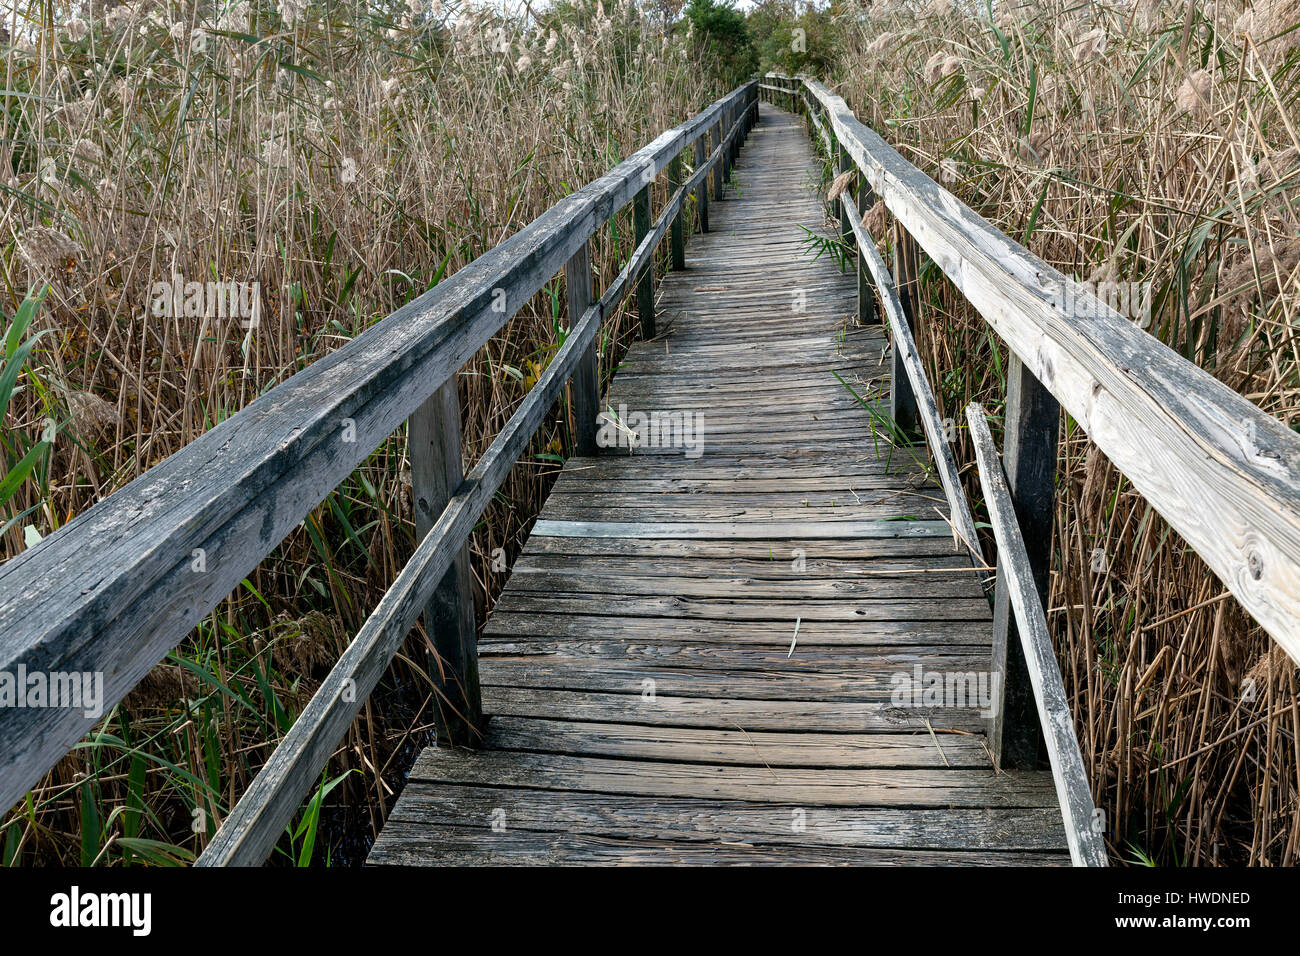 NC00689-00...NORTH CAROLINA - Boardwalk surrounded by common reed (Phragmites) in the marsh near Corolla on the Outer Banks. Stock Photo